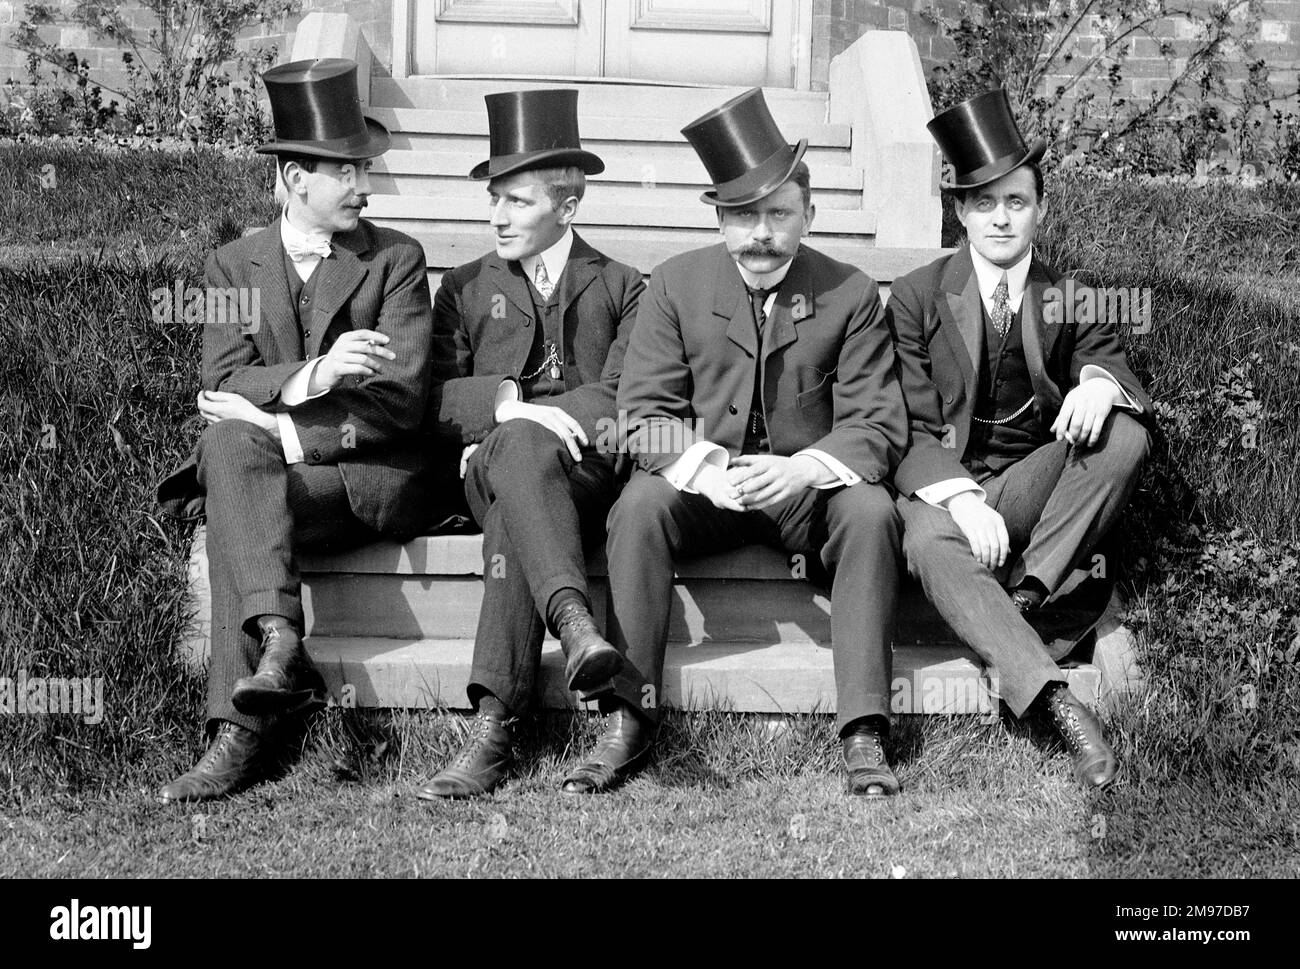 Four well dressed Edwardian men named by the photographer - on the left is Ernest Battersby, the photographer, and their left is his brother James Johnson Battersby. The other two are named as Forster and Dickenson. They are sitting on the steps of the Battersby family home in Stockport, and their dress will reflect their upper-middle class status at the time. Stock Photo